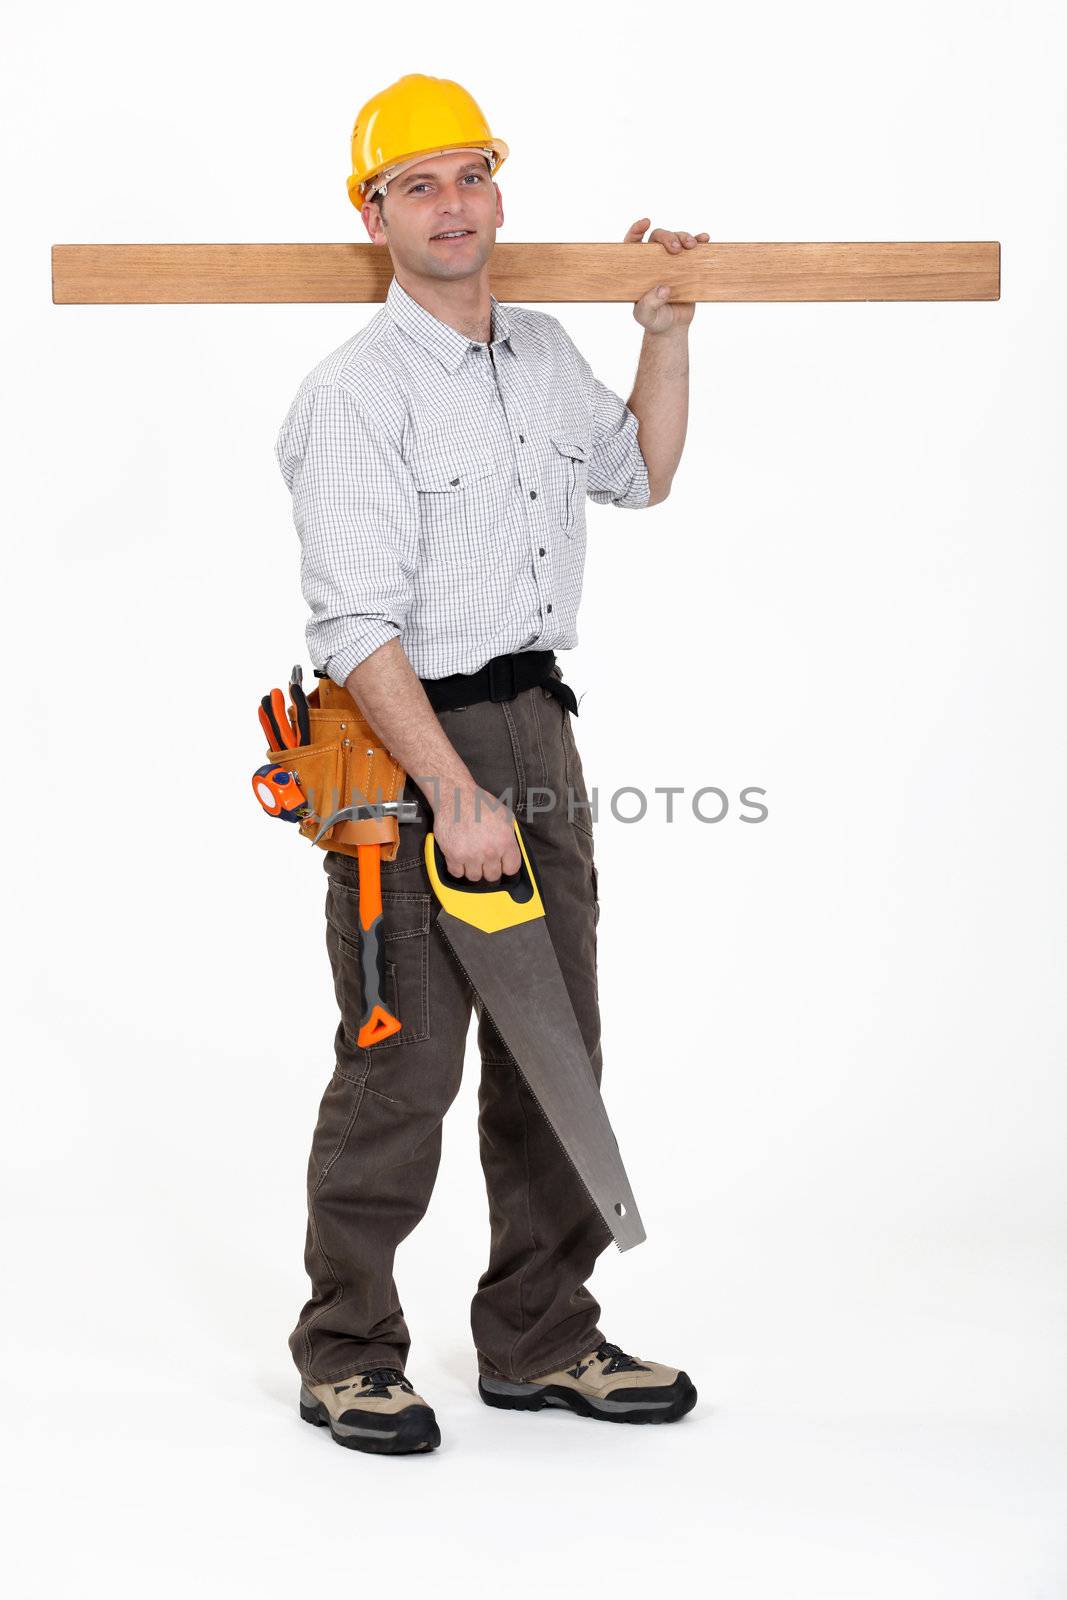 Man carrying plank of wood